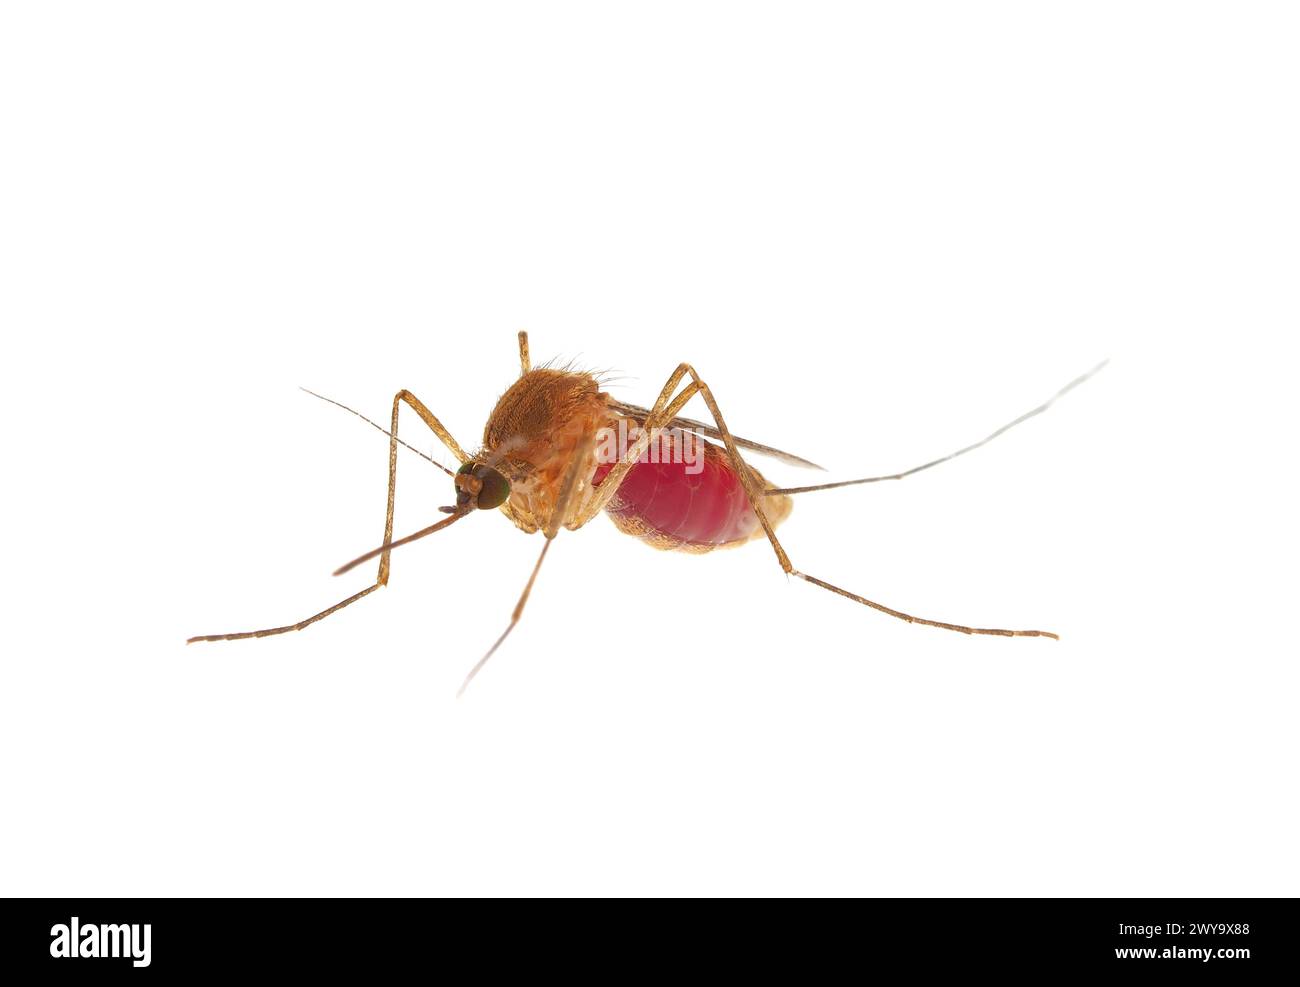 Inland floodwater mosquito full of blood isolated on white background, Aedes vexans Stock Photo